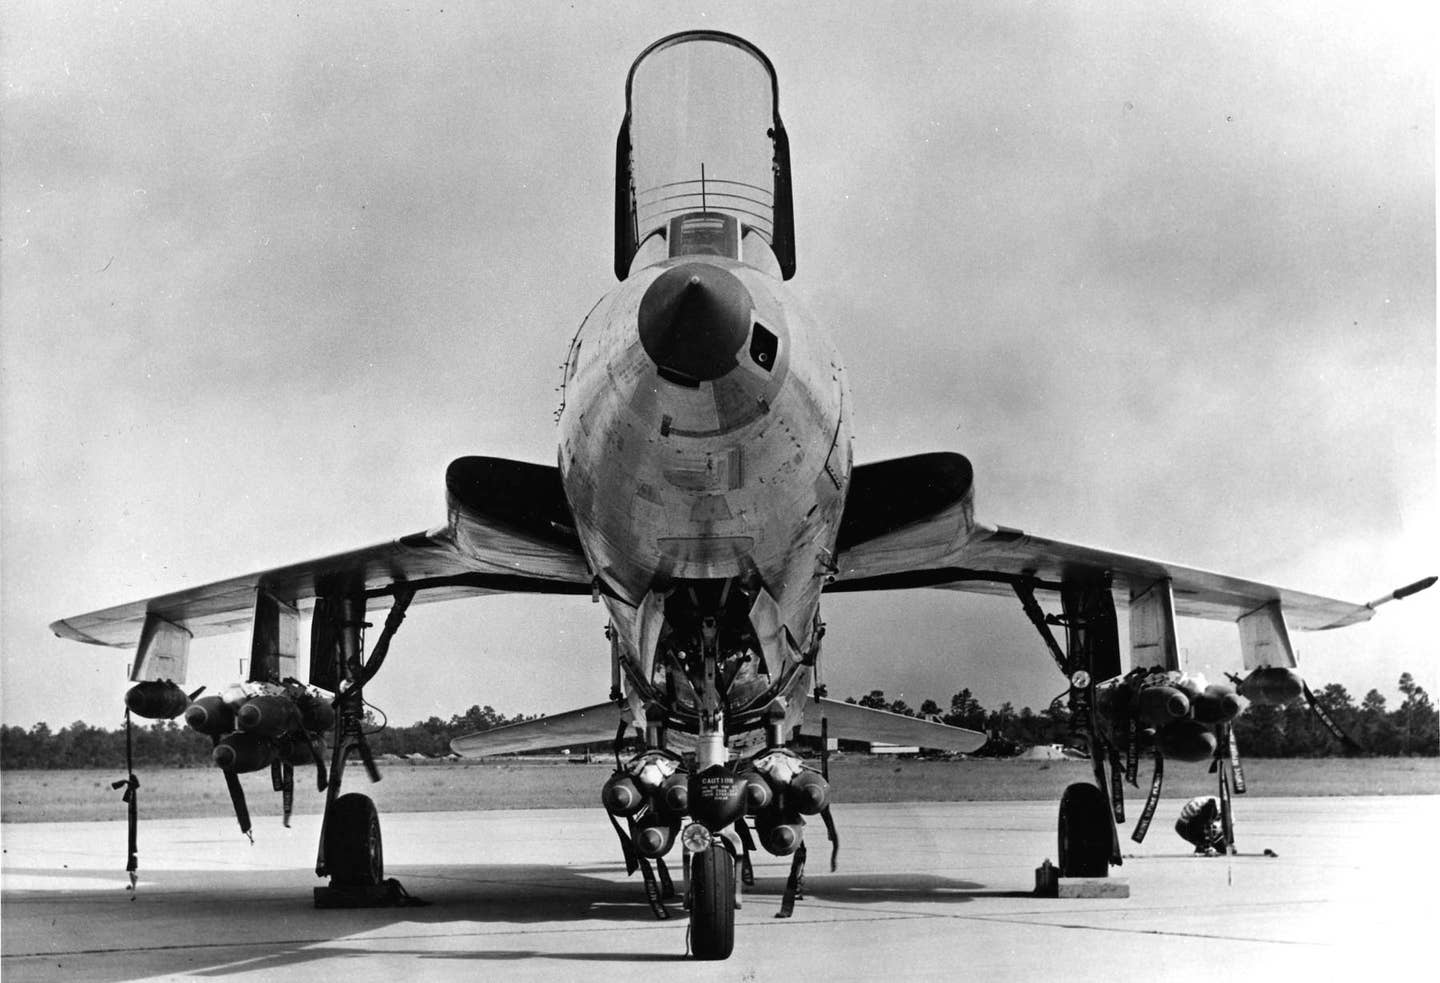 Front view of the F-105.